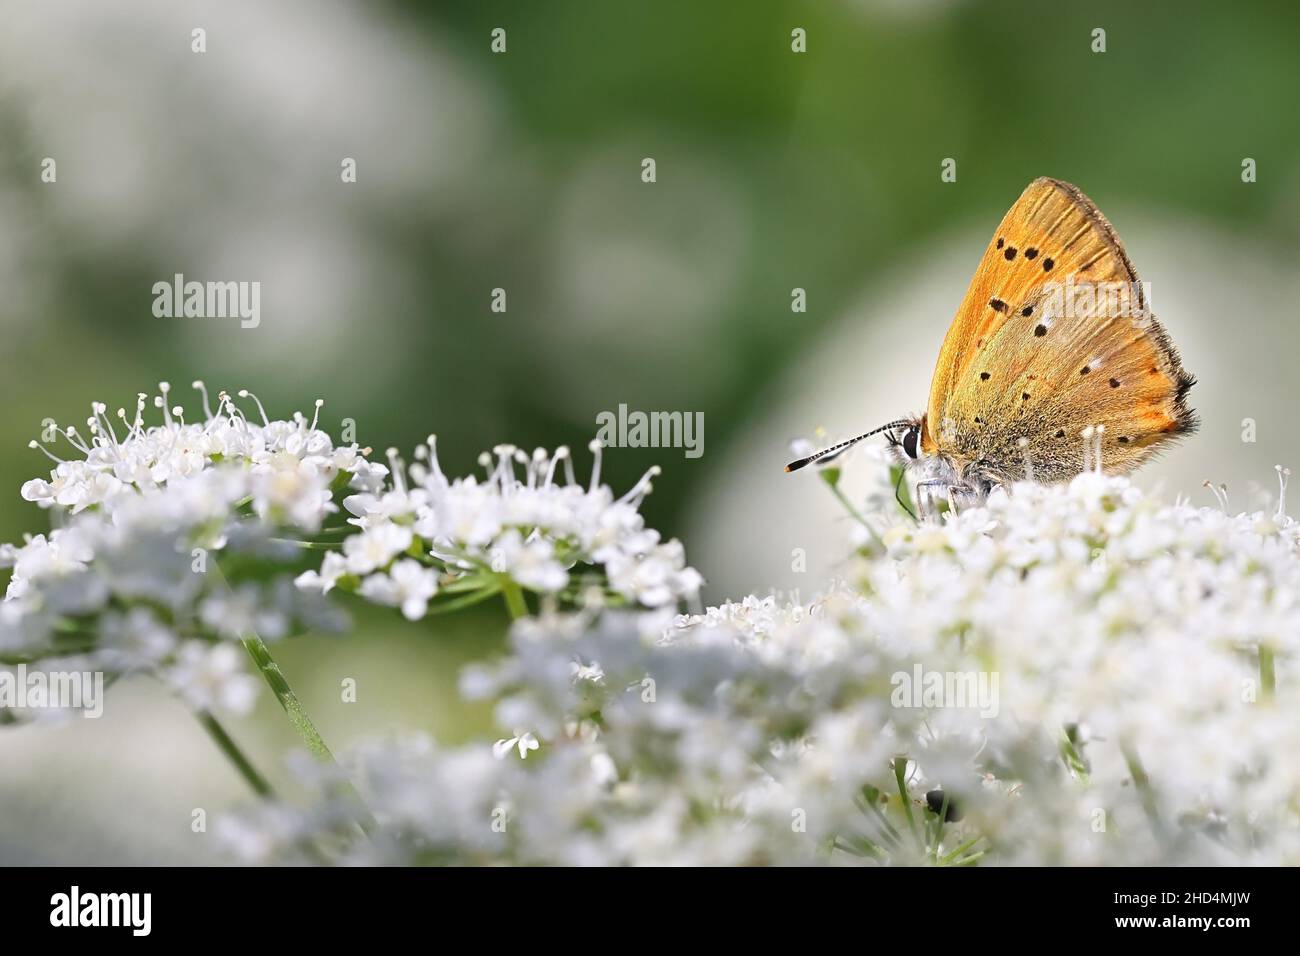 Lycaena virgaureae, known as Scarce copper butterfly, feeding on Cow Parsley, Anthriscus sylvestris Stock Photo